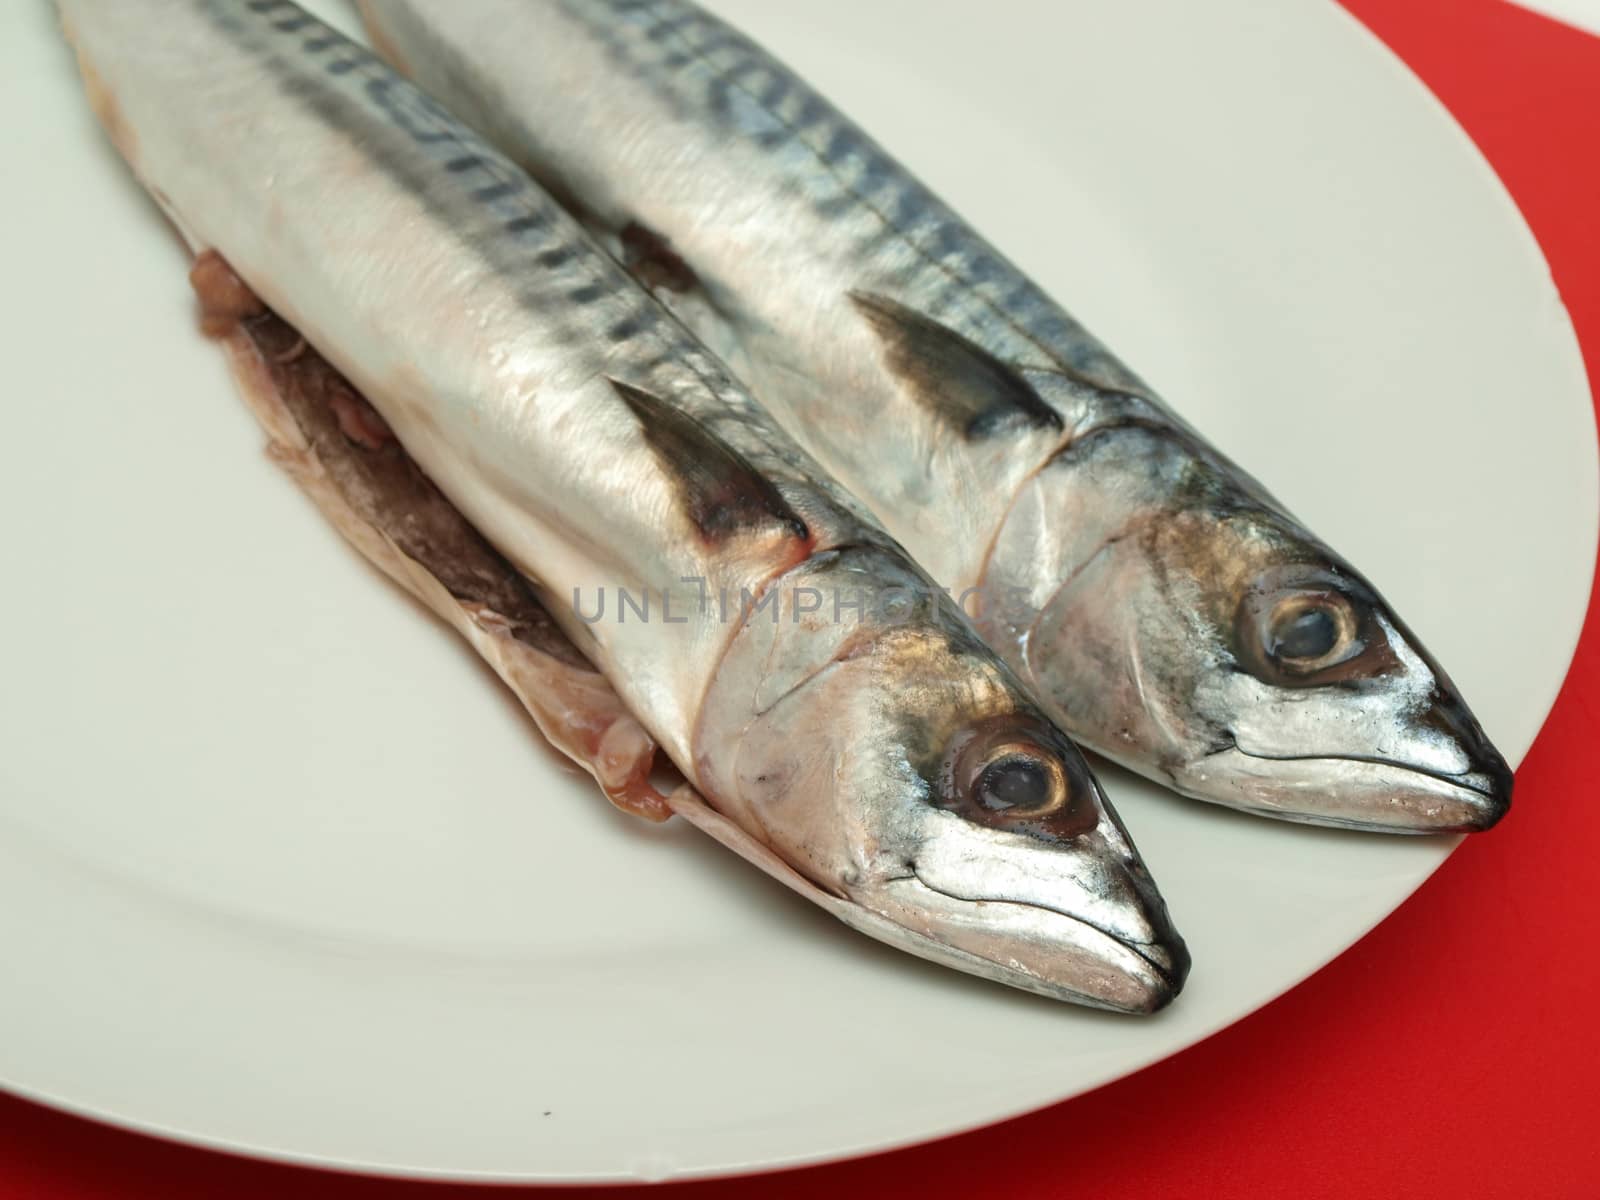 Raw mackerel fish on white plate, towards red chopping board